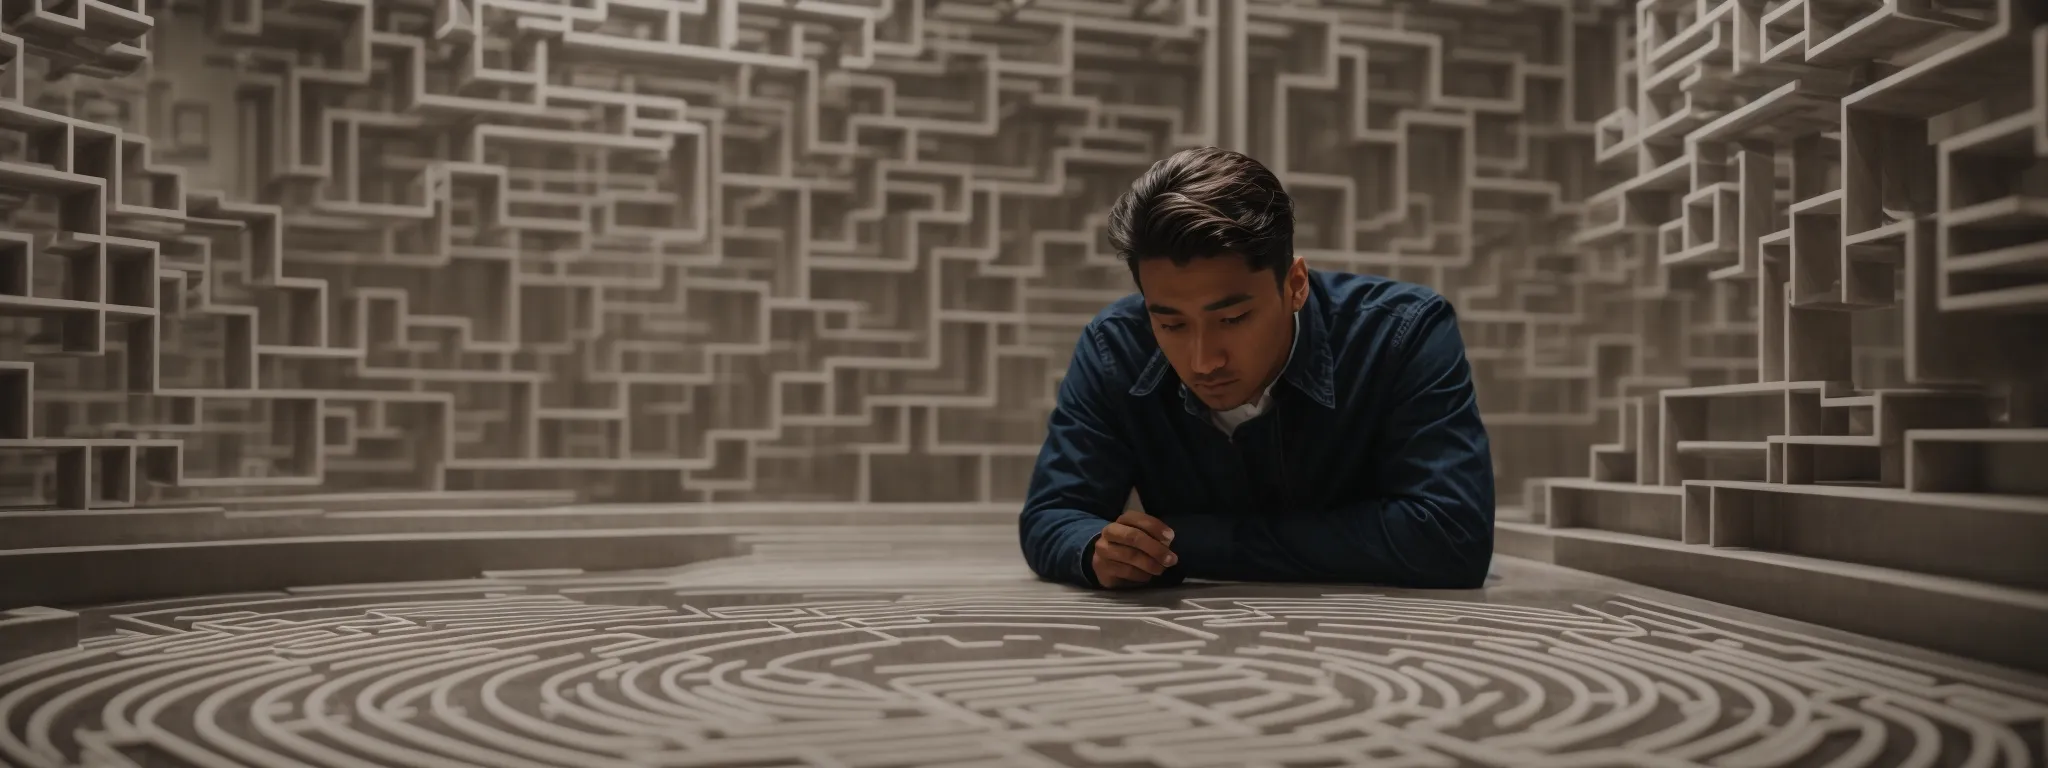 a perplexed individual staring at a maze-like blueprint representing a website's architecture.